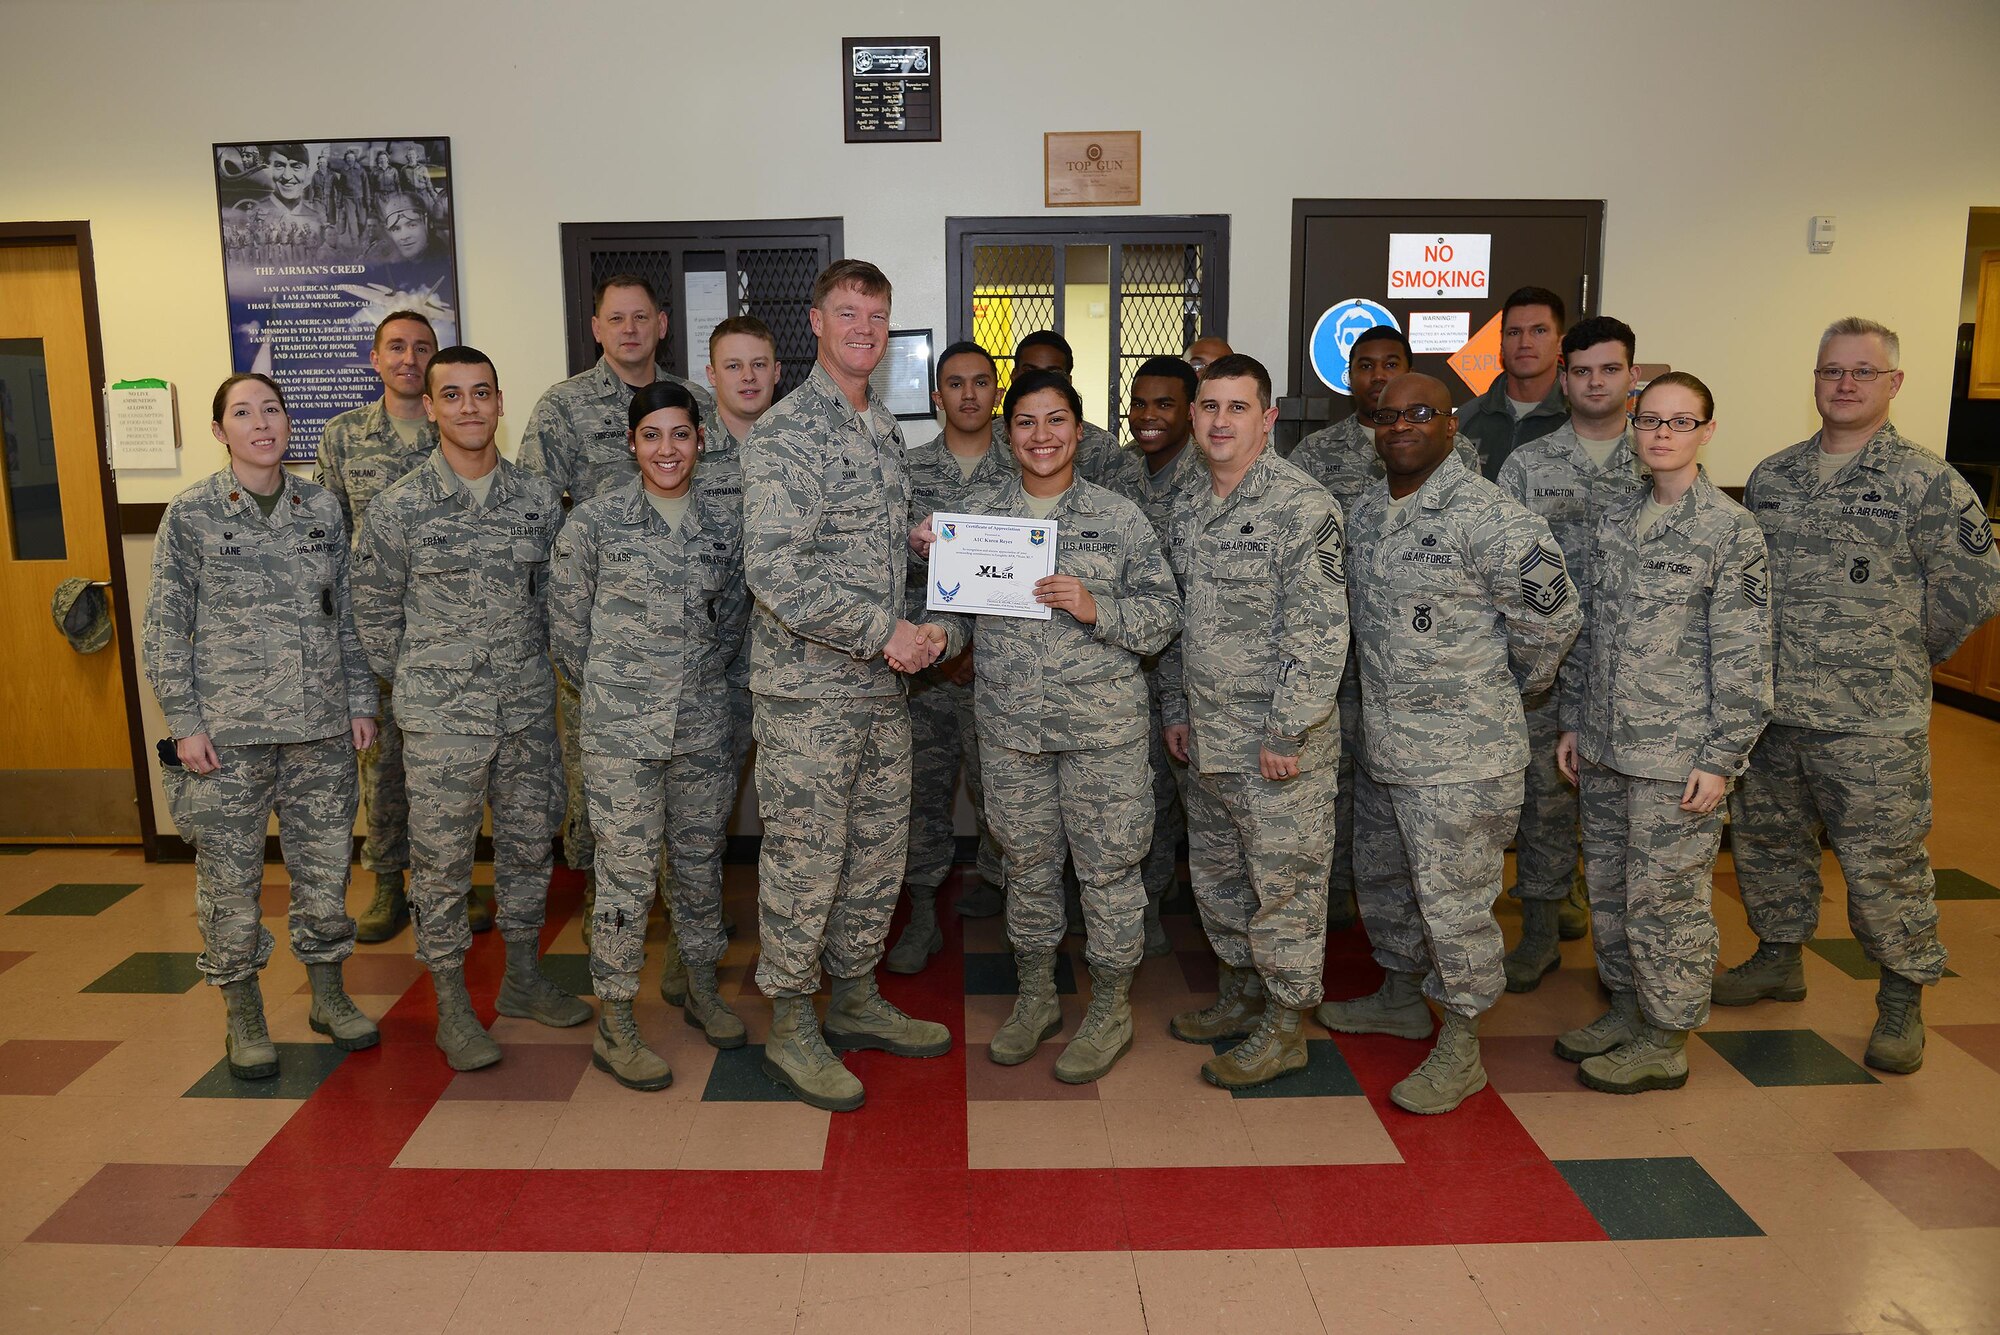 Airman 1st Class Karen Reyes, 47th Security Forces Squadron patrolman (front center), accepts the “XLer of the Week” award from Col. Thomas Shank, 47th Flying Training Wing commander (front left), and Chief Master Sgt. George Richey, 47th FTW command chief (front right), on Laughlin Air Force Base, Texas, Jan. 19, 2017. The XLer is a weekly award chosen by wing leadership and is presented to those who consistently make outstanding contributions to their unit and Laughlin. (U.S. Air Force photo/Airman 1st Class Benjamin N. Valmoja)